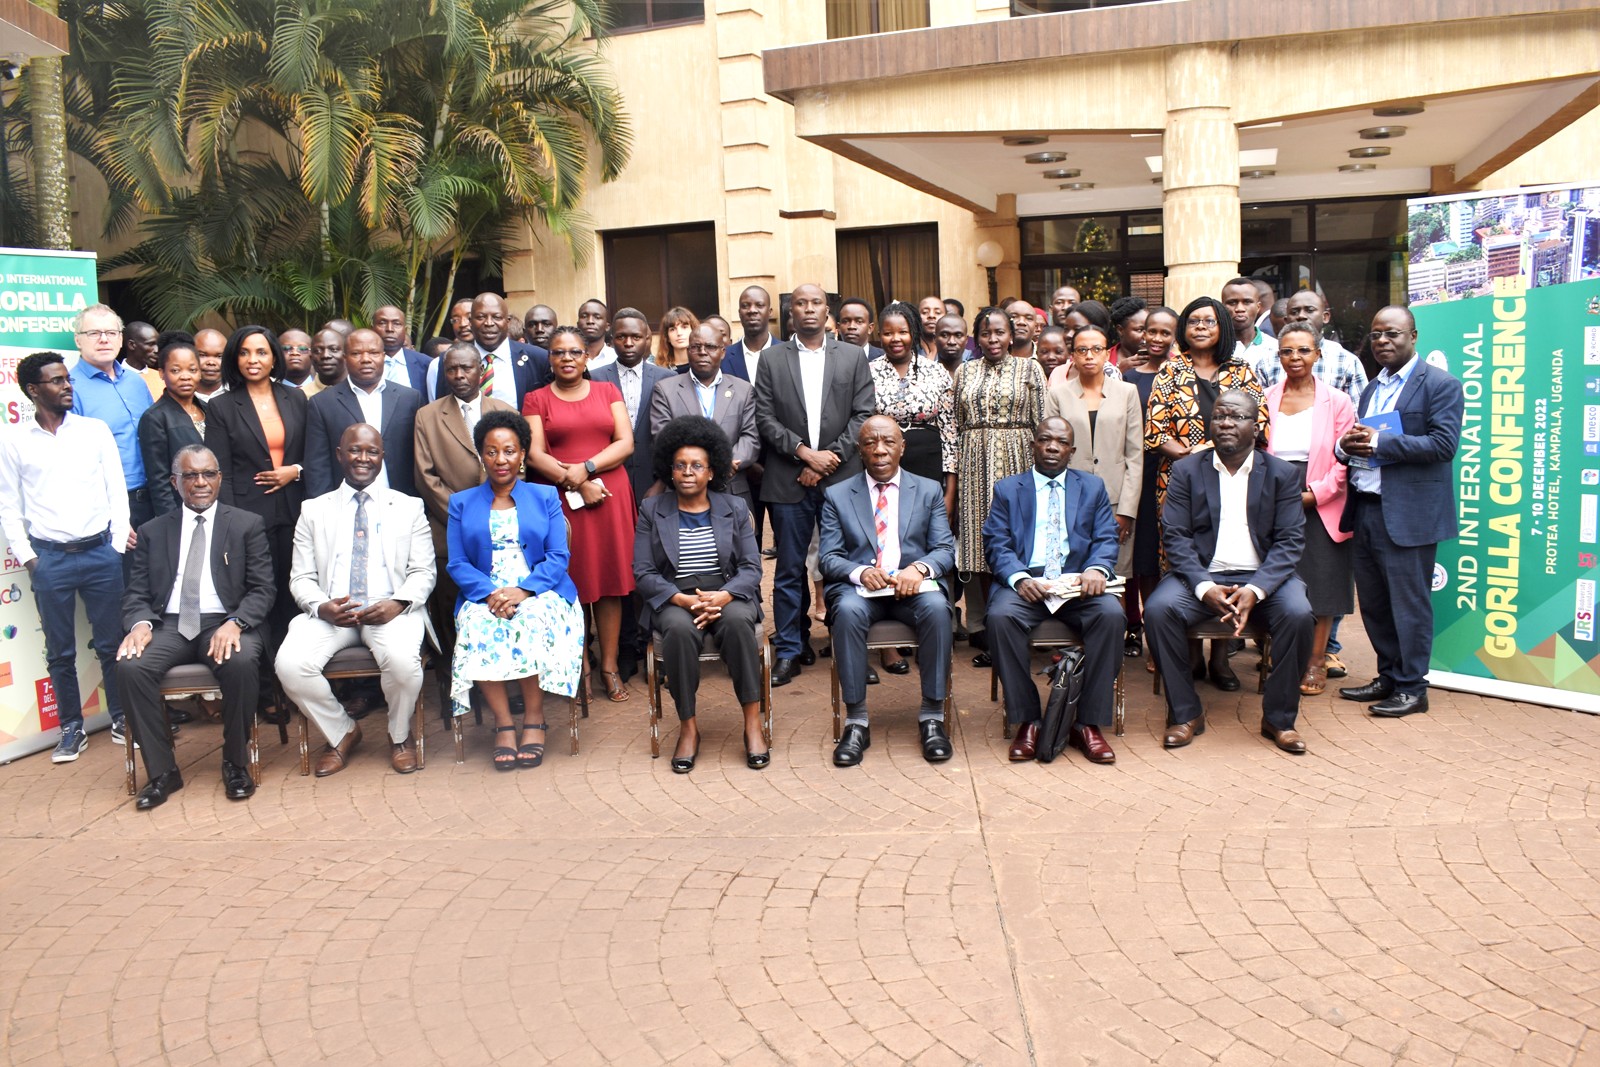 The Minister of Science, Technology and Innovation, Hon. Dr. Monica Musenero Masanza (seated C) in a group photo with participants after the opening ceremony of the GORILLA Conference held 8th-9th December 2022 at Protea Hotel, Kampala.